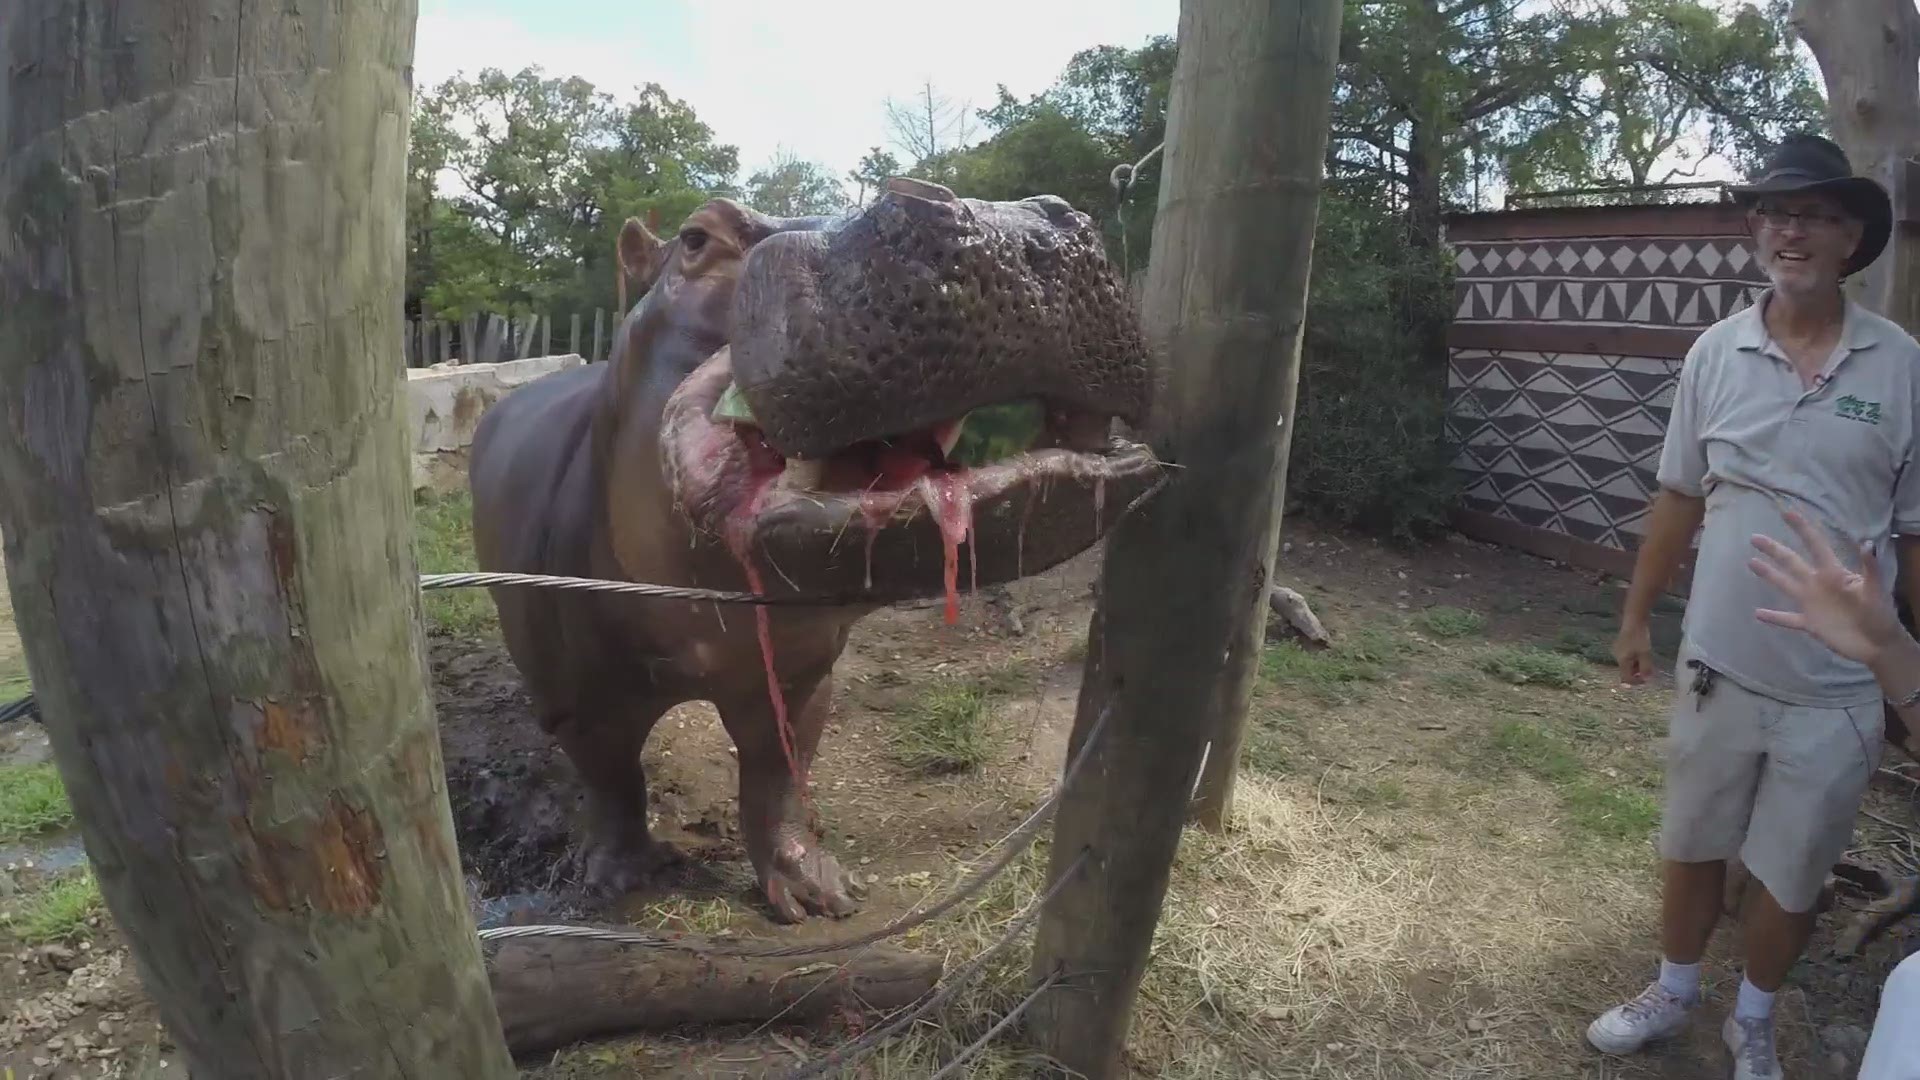 KVUE's Jenni Lee feeds tank the Hippo in Bastrop.